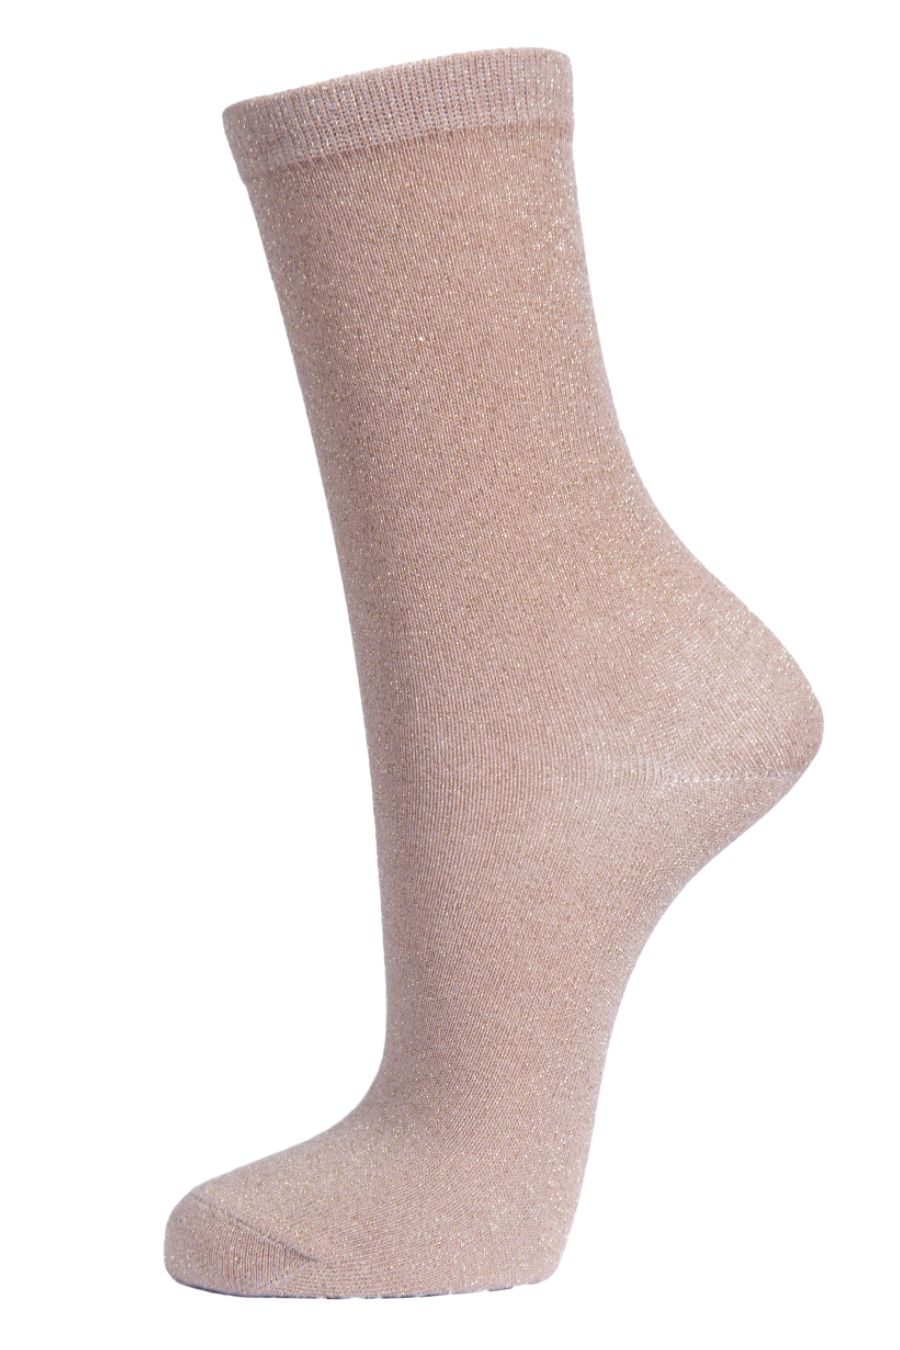 beige ankle socks with an all over gold shimmer effect